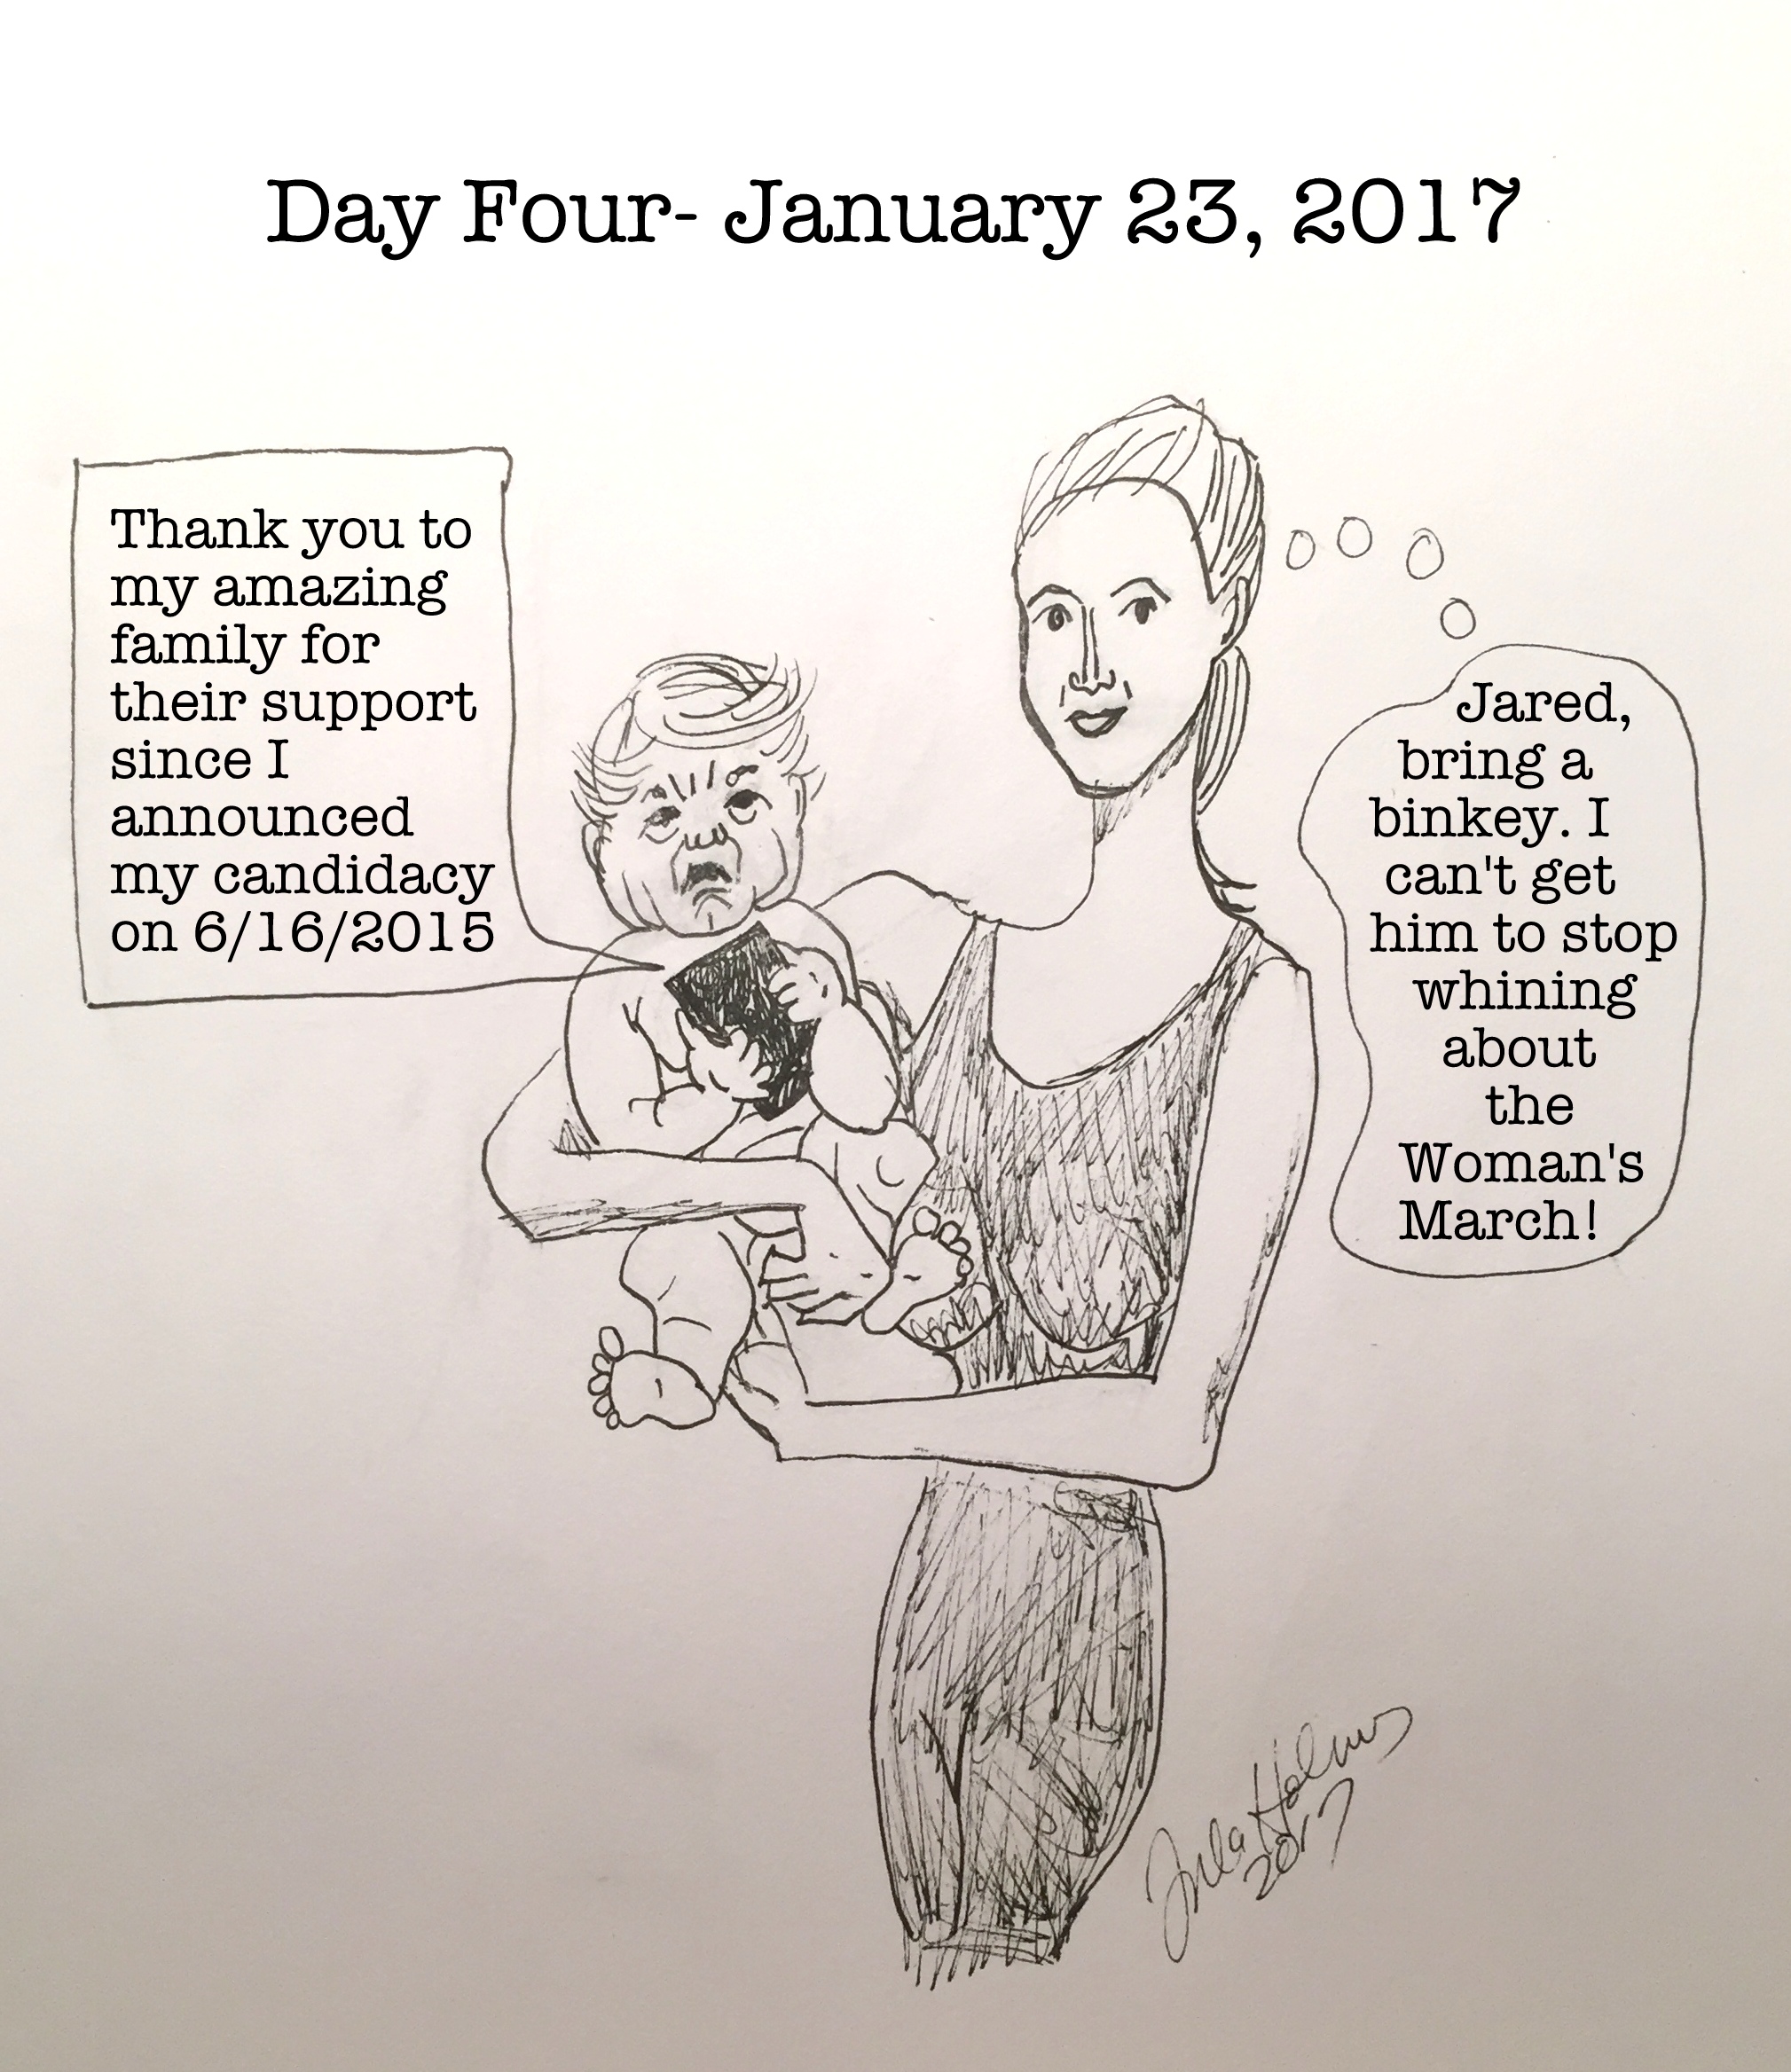 Day Four- January 23, 2017- Copyright 2017